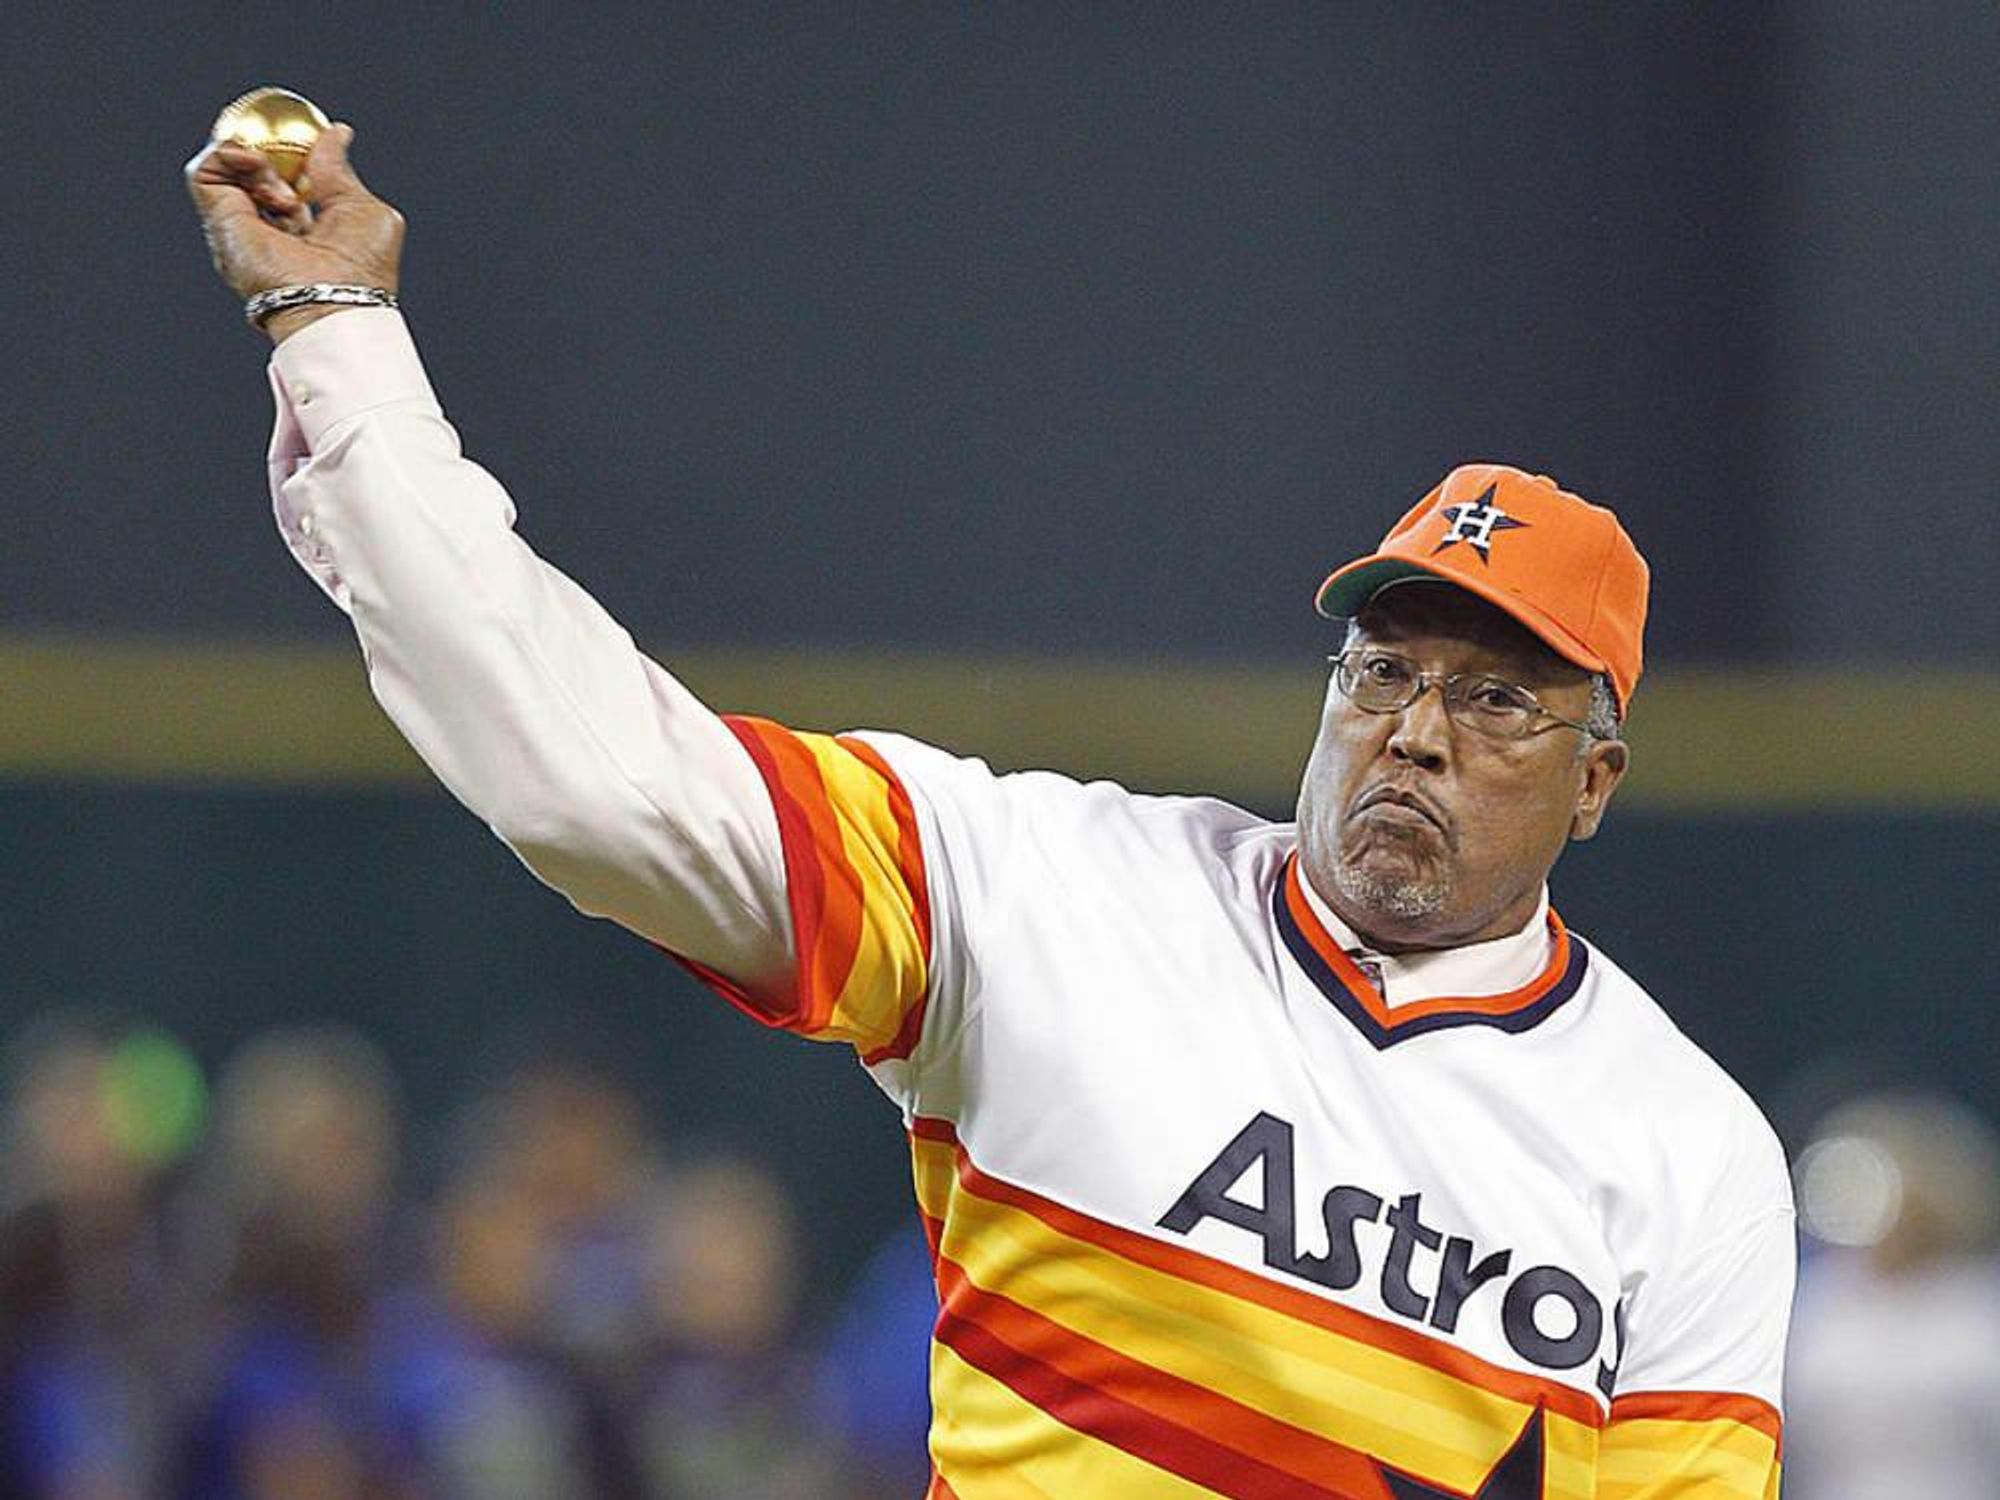 J.R. Richard, power pitcher for Astros in '70s, dies at 71 - The San Diego  Union-Tribune